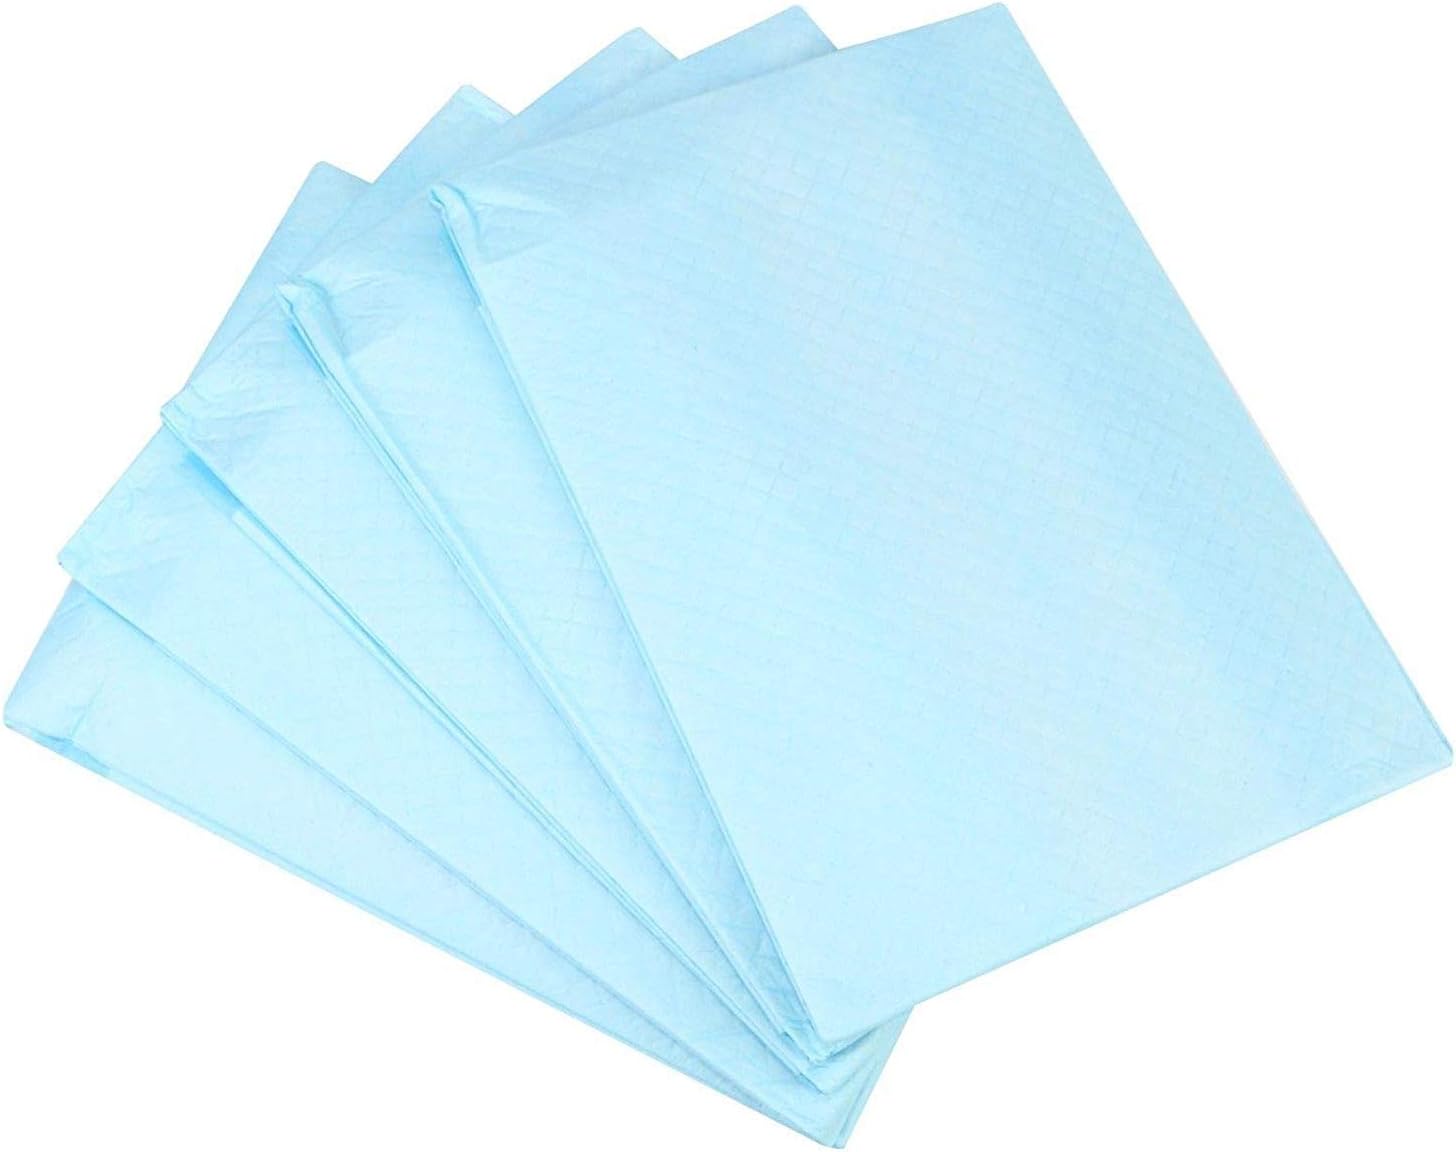 50 Disposable Mats 40x60cm Baby Potty Training Pads Sheet Bed Pee Underpads Changing Sheets